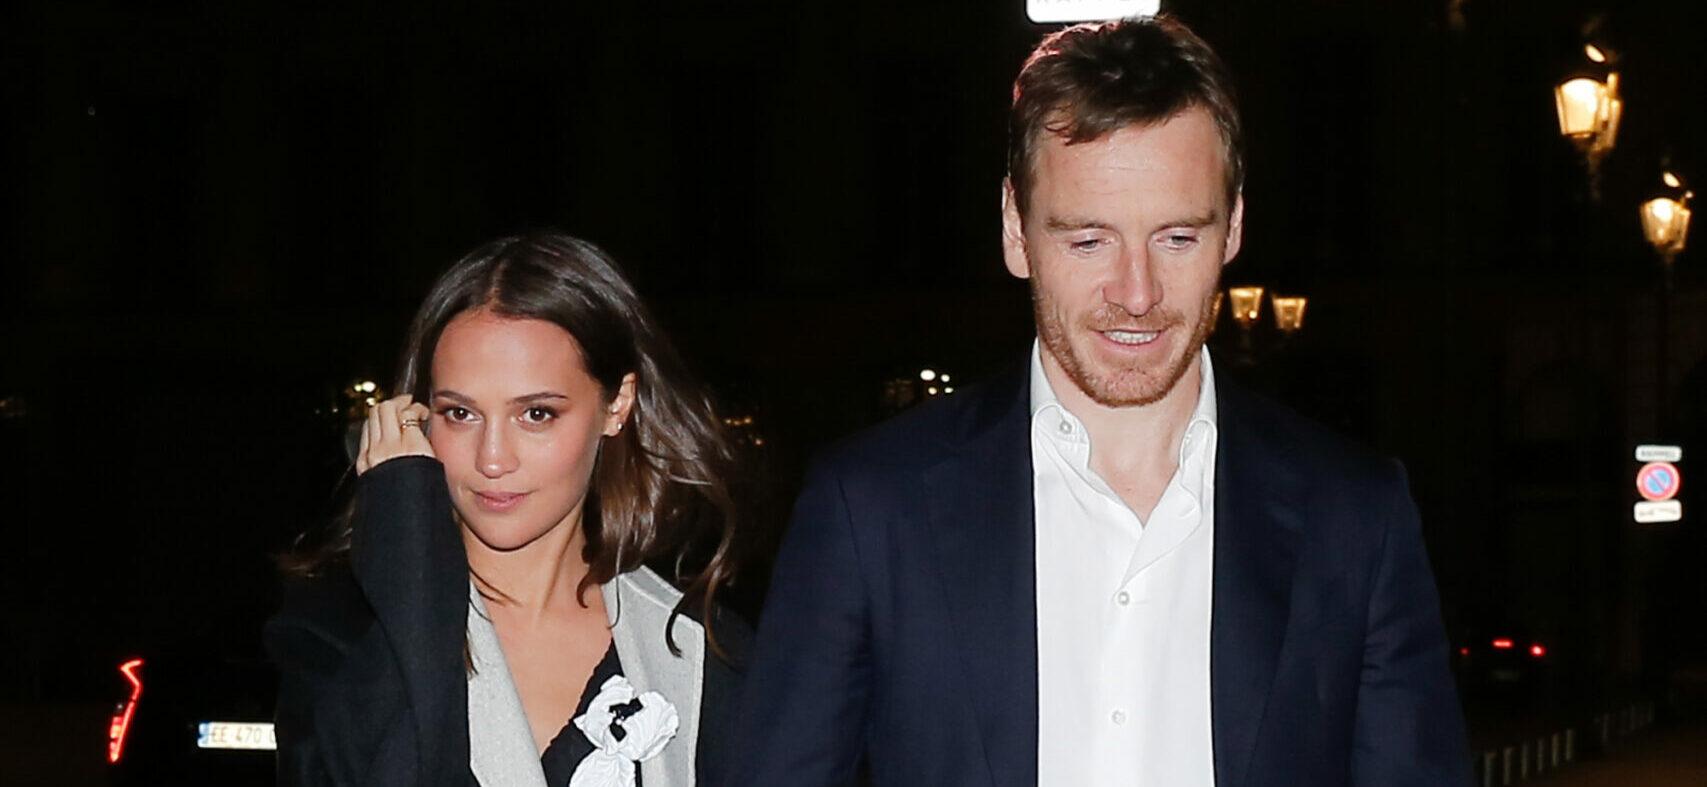 Michael Fassbender and Alicia Vikander leaving Louis Vuitton dinner during the Paris Fashion Week 2020